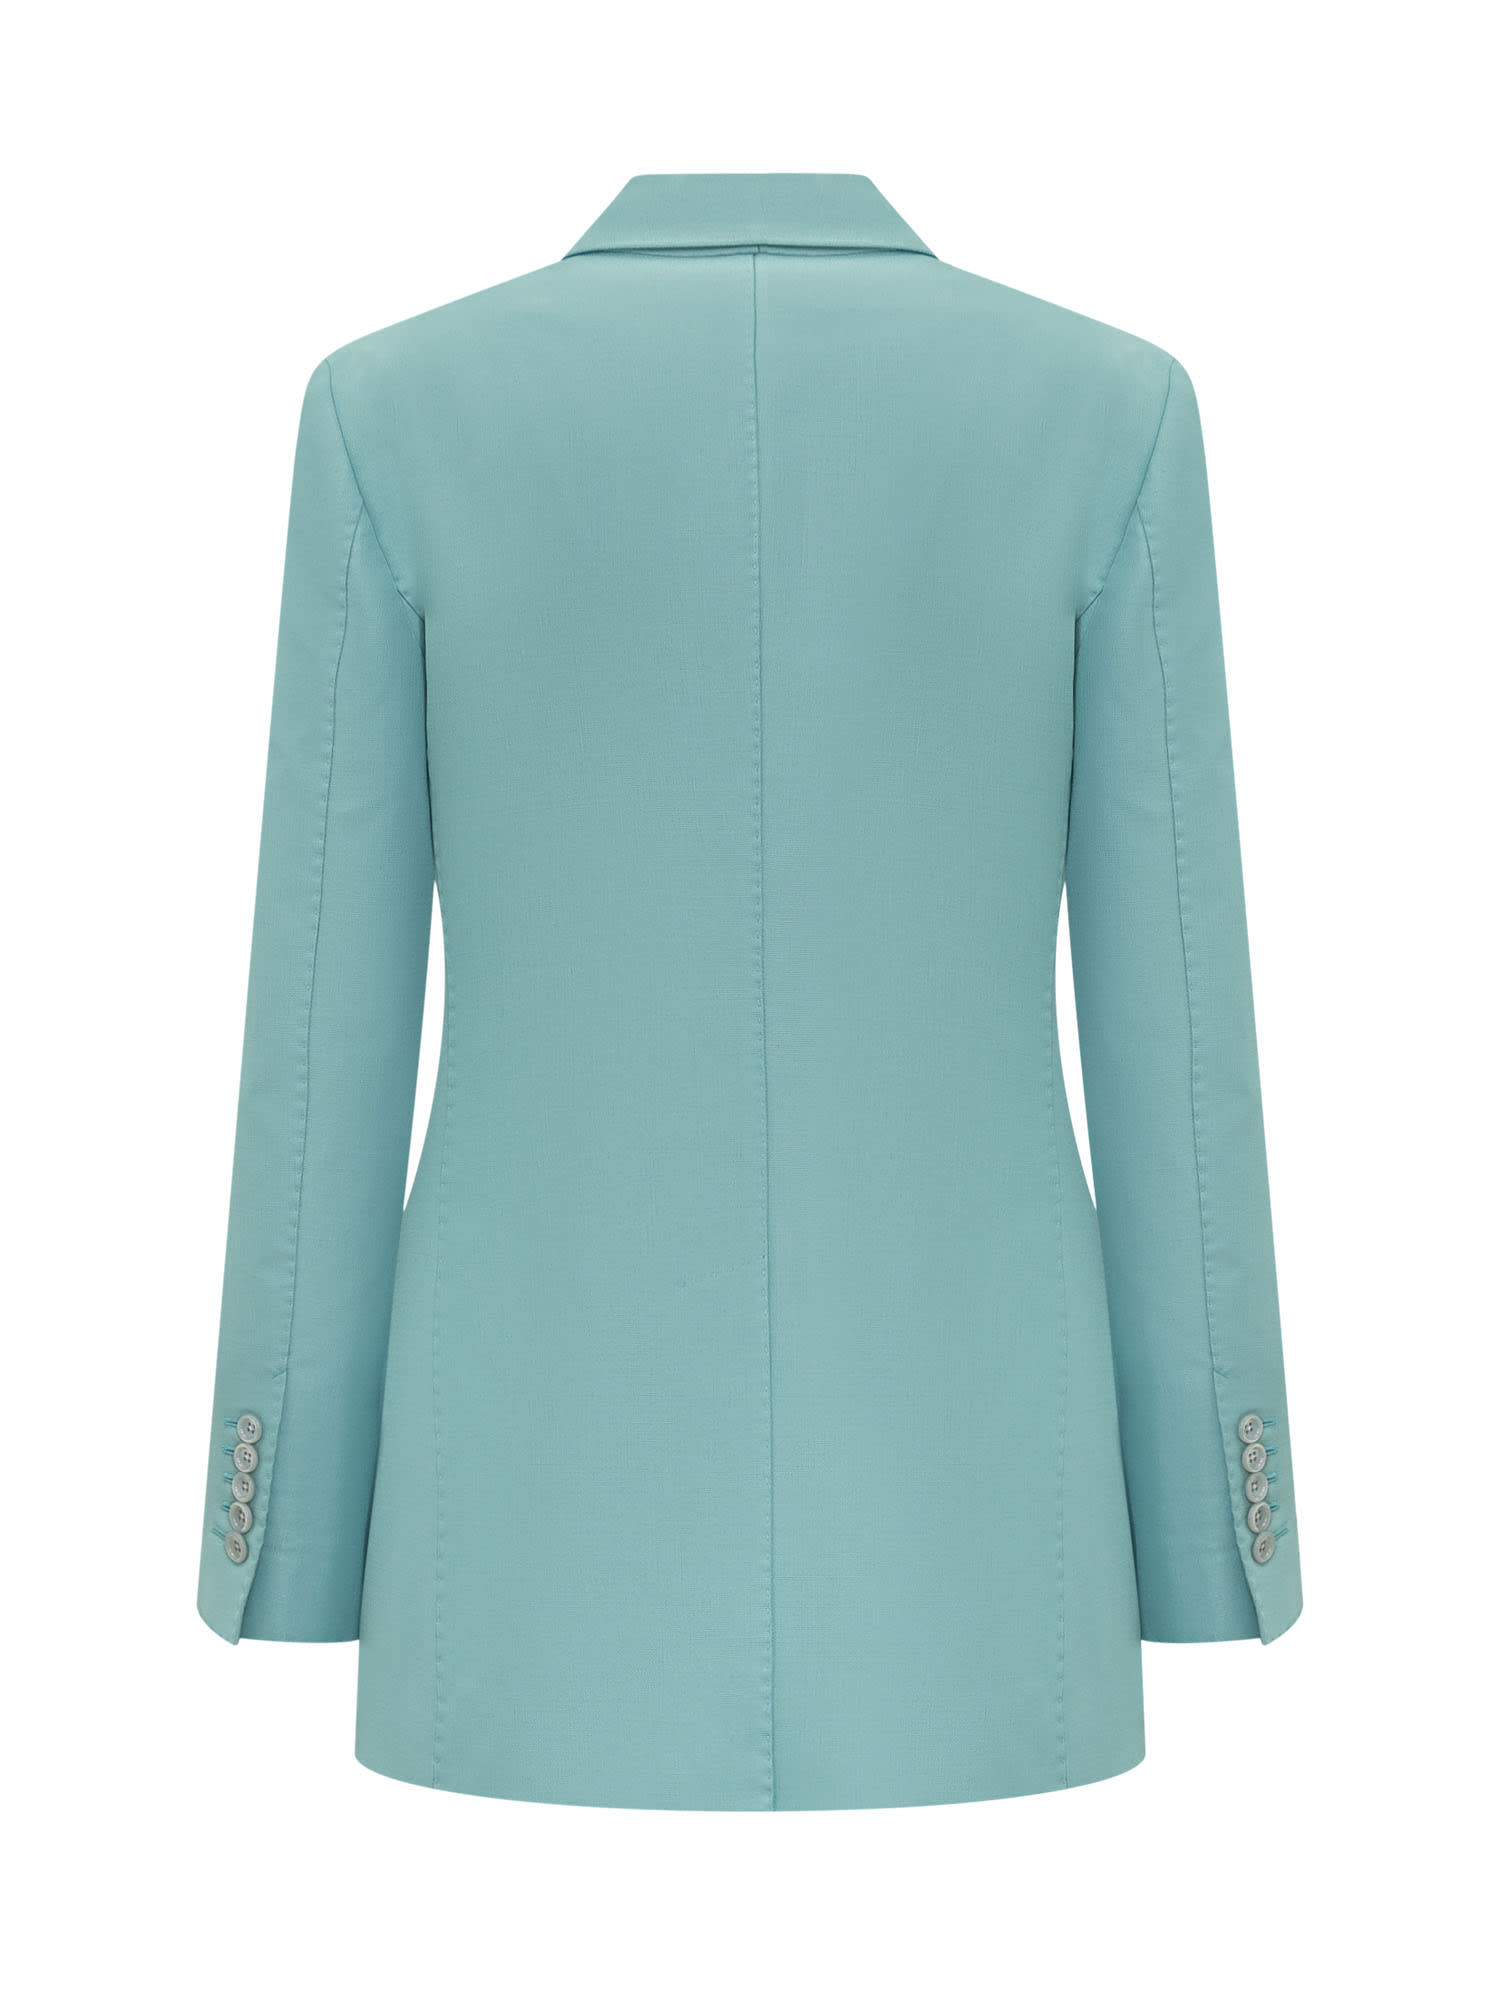 Shop Tom Ford Virign Wool And Viscose Blend Jacket In Light Turquoise